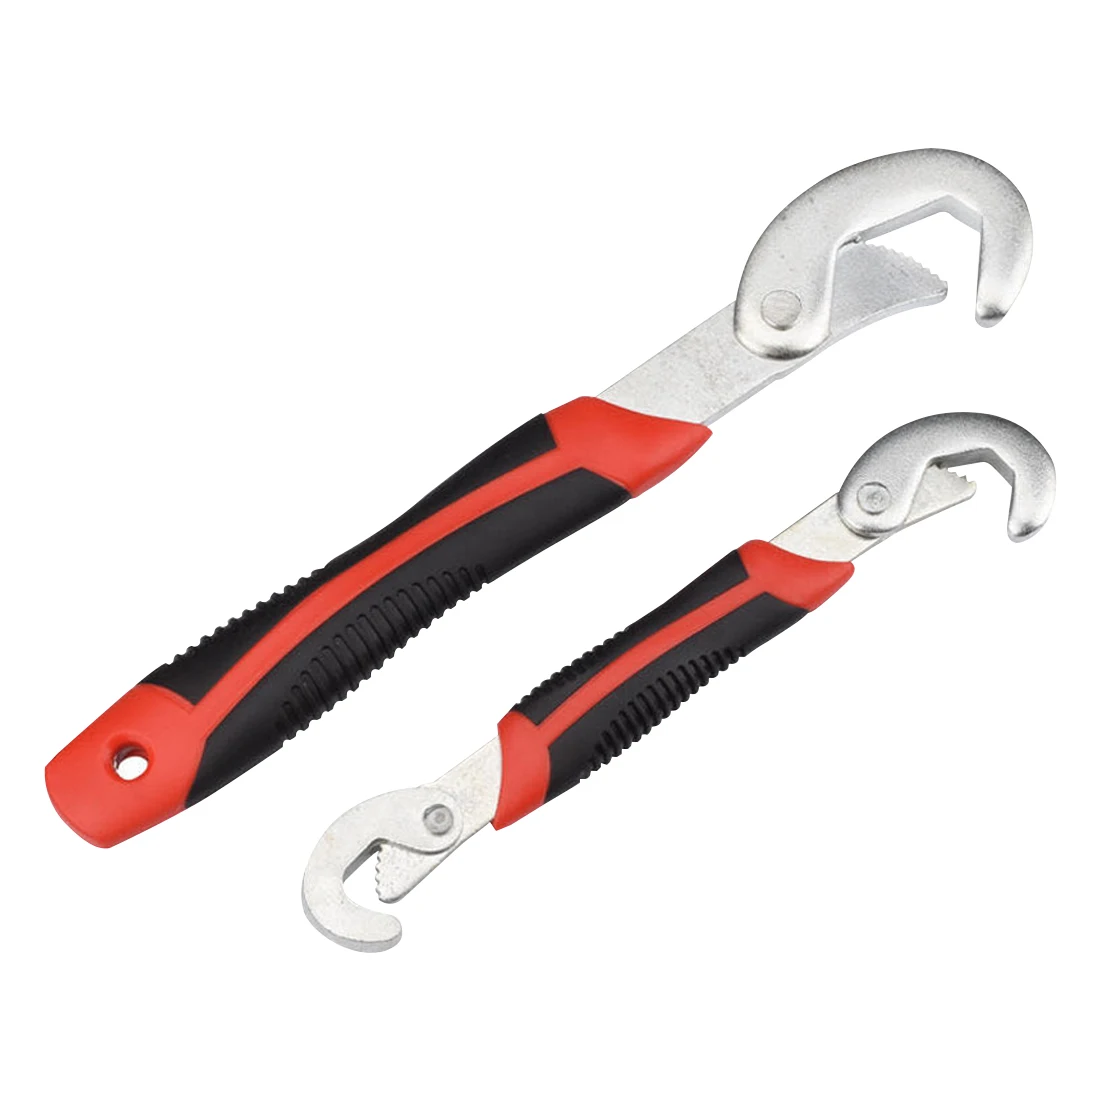 

Multi-Functional Wrench Spanner Set Adjustable Universal Quick Snap Soft Grip Portable Torque Ratchet Oil Filter Hand Tools